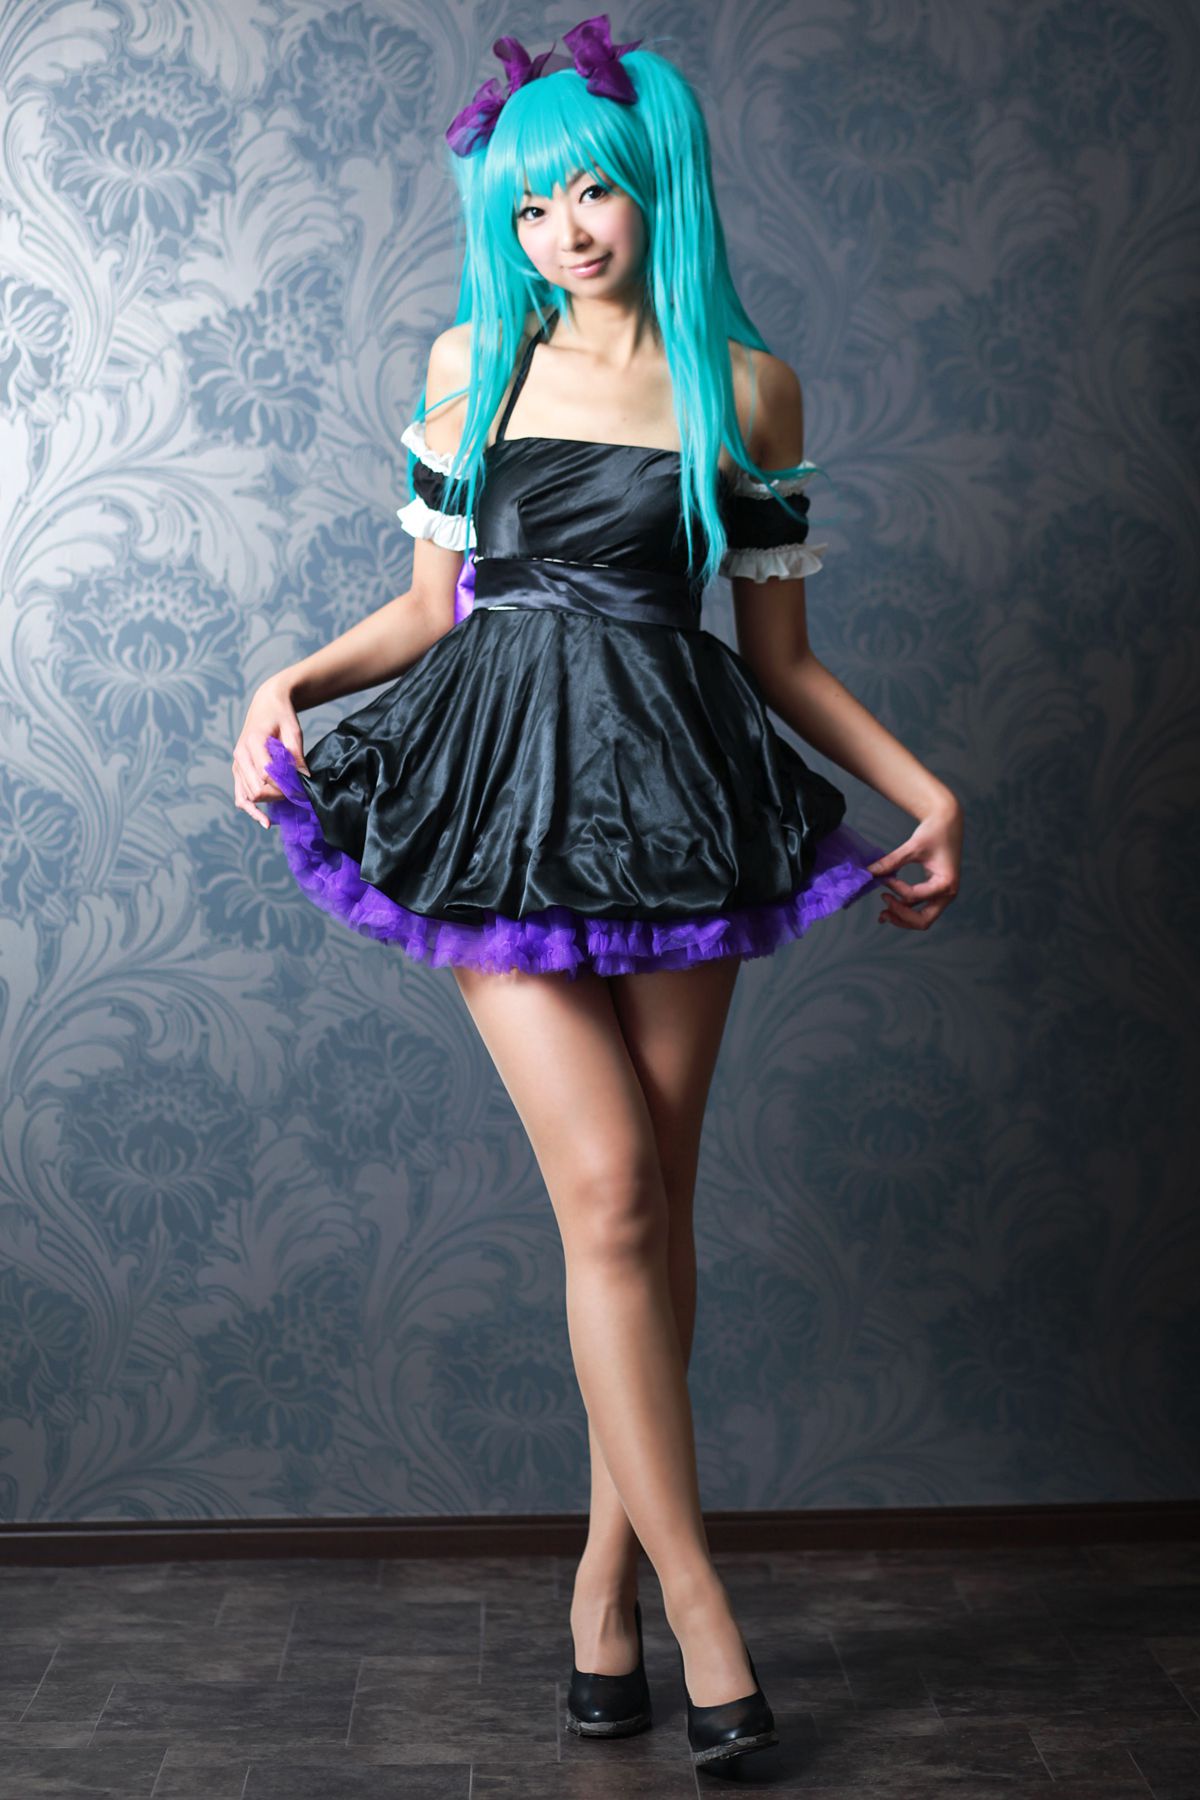 taotuhome[Cosplay] Necoco as Hatsune Miku from Vocaloid 套图第150张